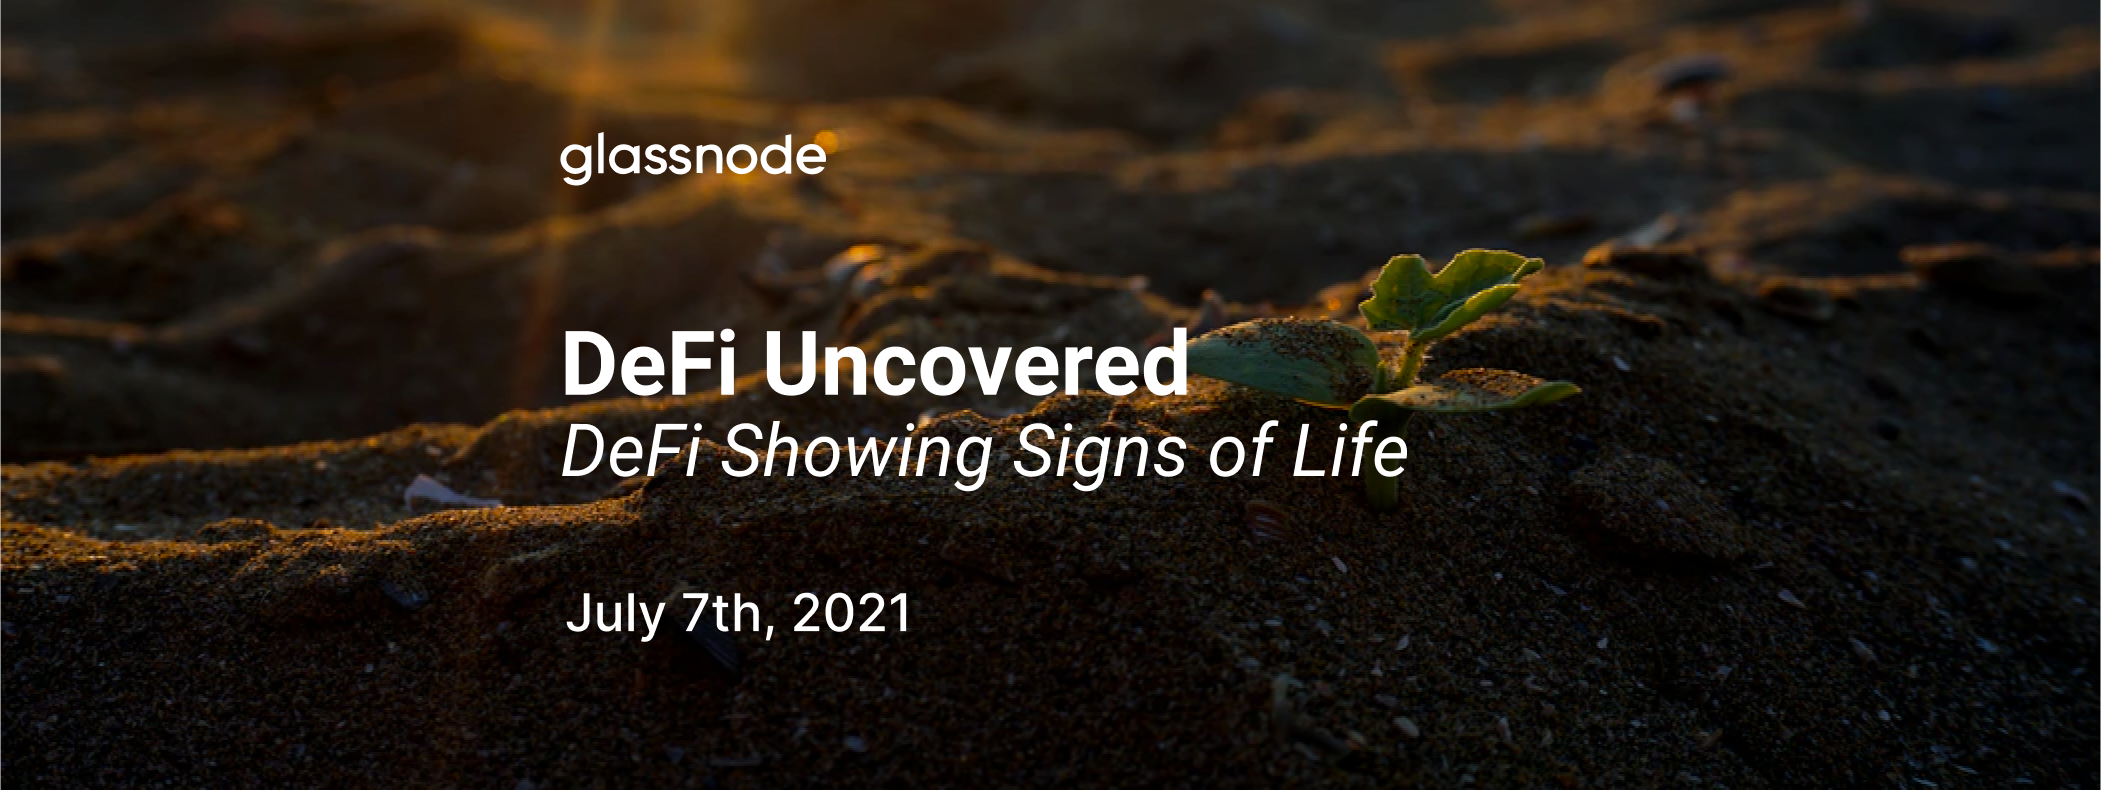 DeFi Uncovered: DeFi Showing Signs of Life